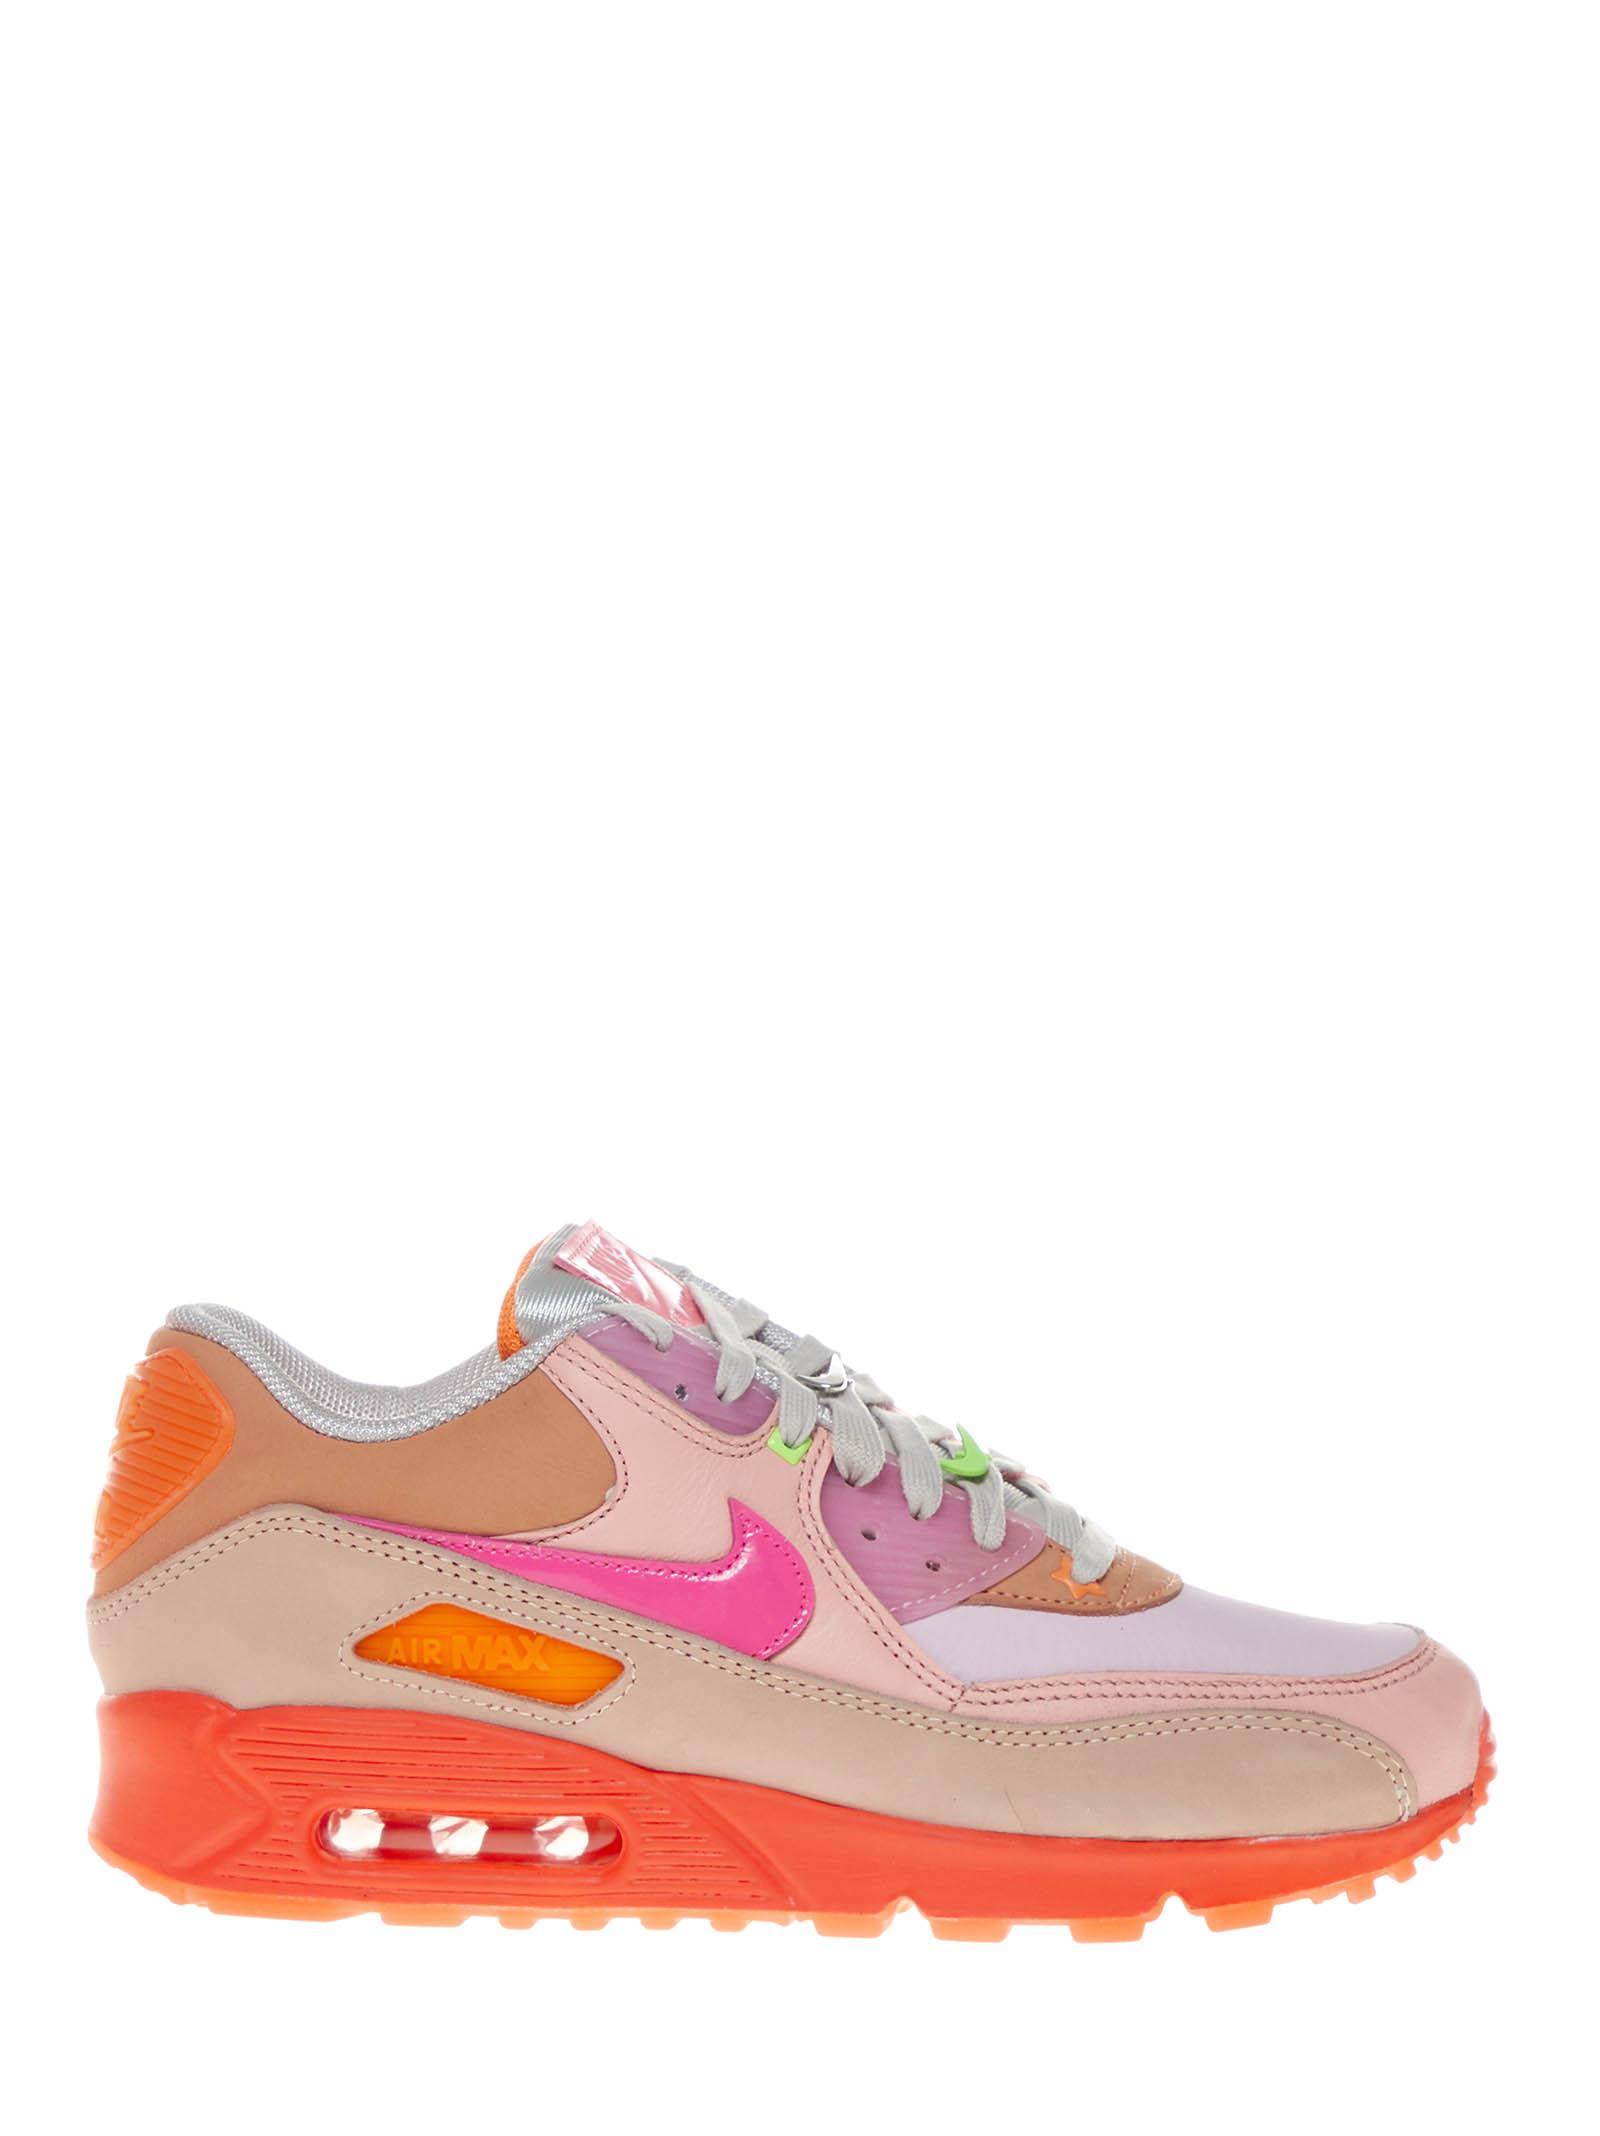 Nike Pink And Orange Air Max 90 Sneakers With Layered Design And Integrated  Air Technology. | Lyst